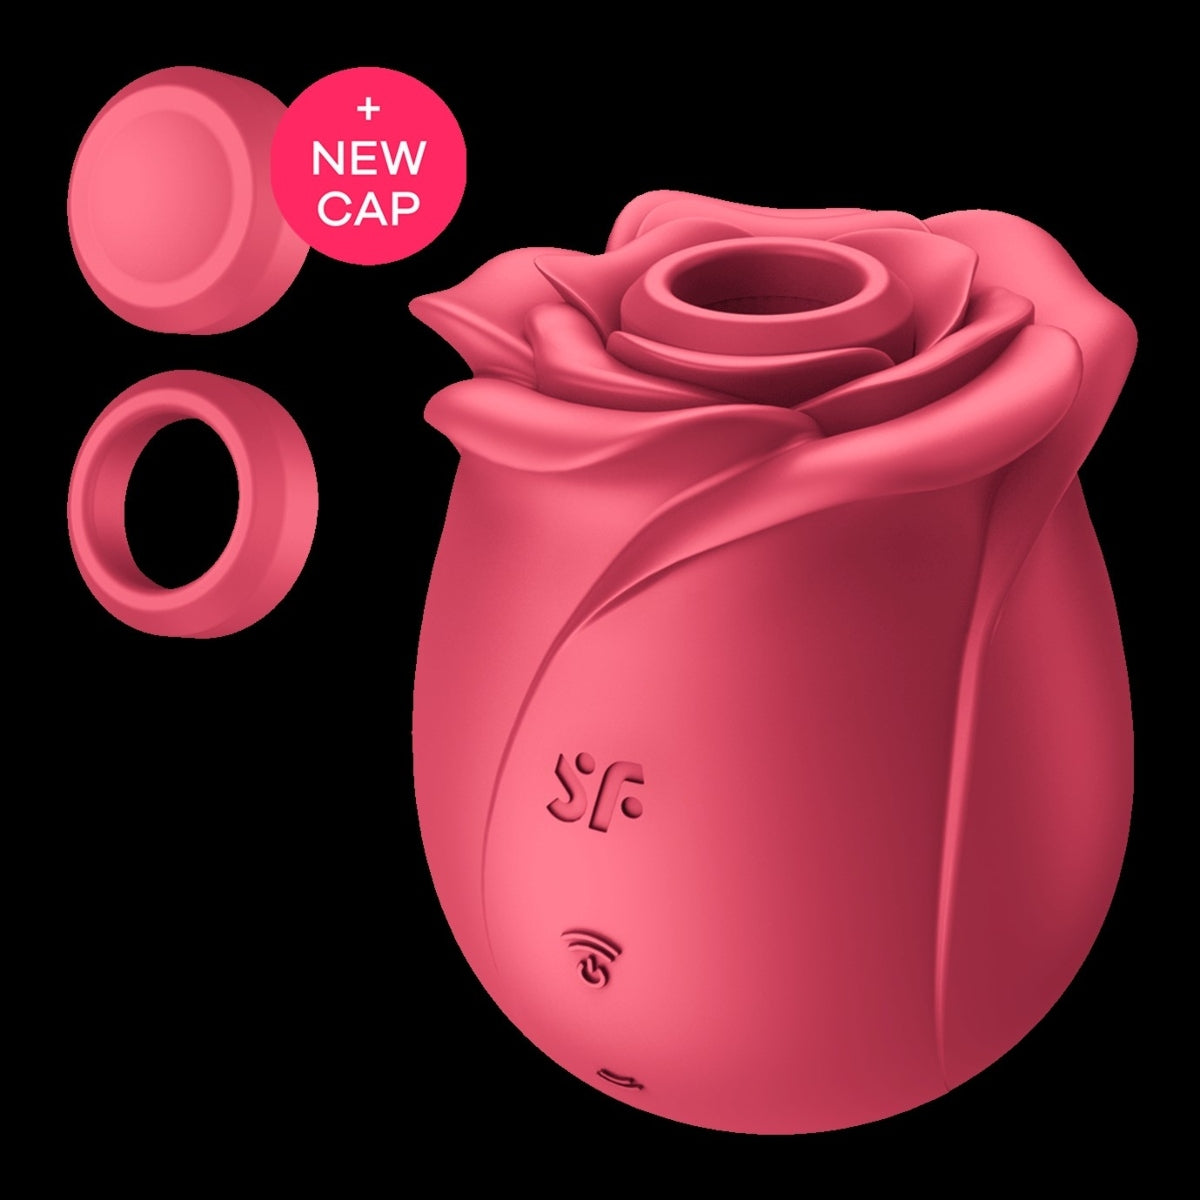 a pink rose shaped device with a new cap